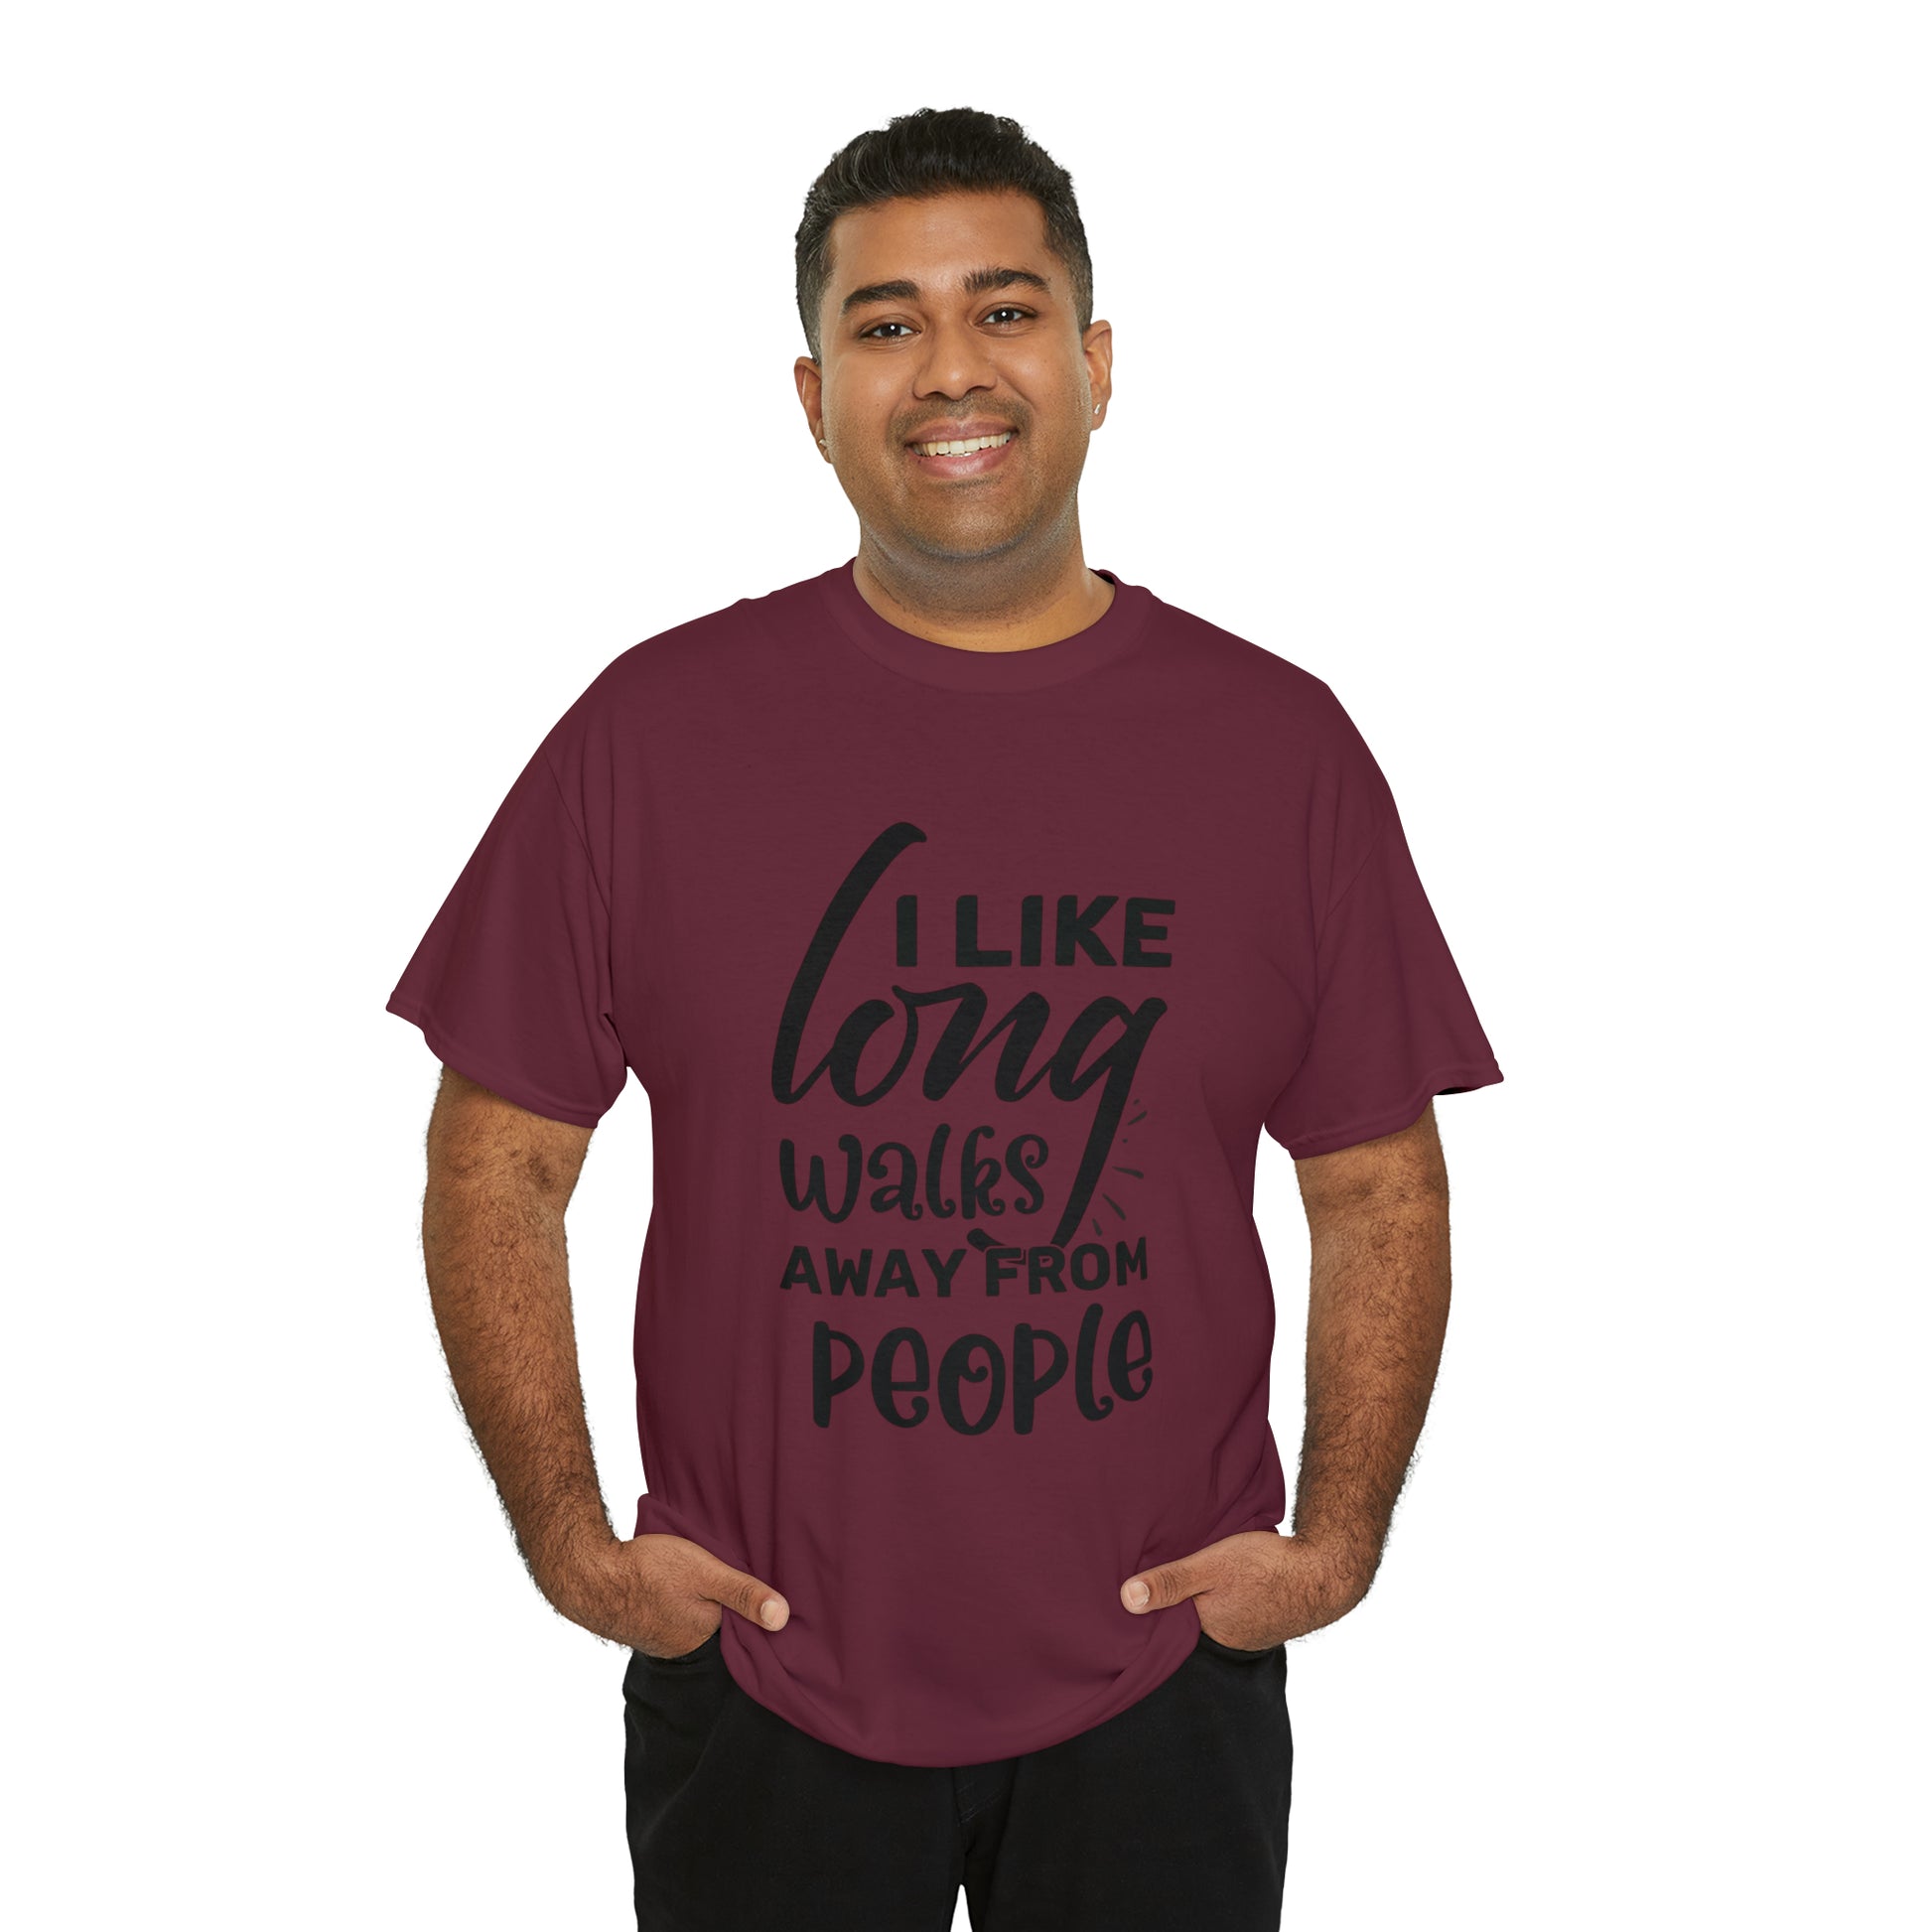 "I Like Long Walks Away From People" T-Shirt - Weave Got Gifts - Unique Gifts You Won’t Find Anywhere Else!